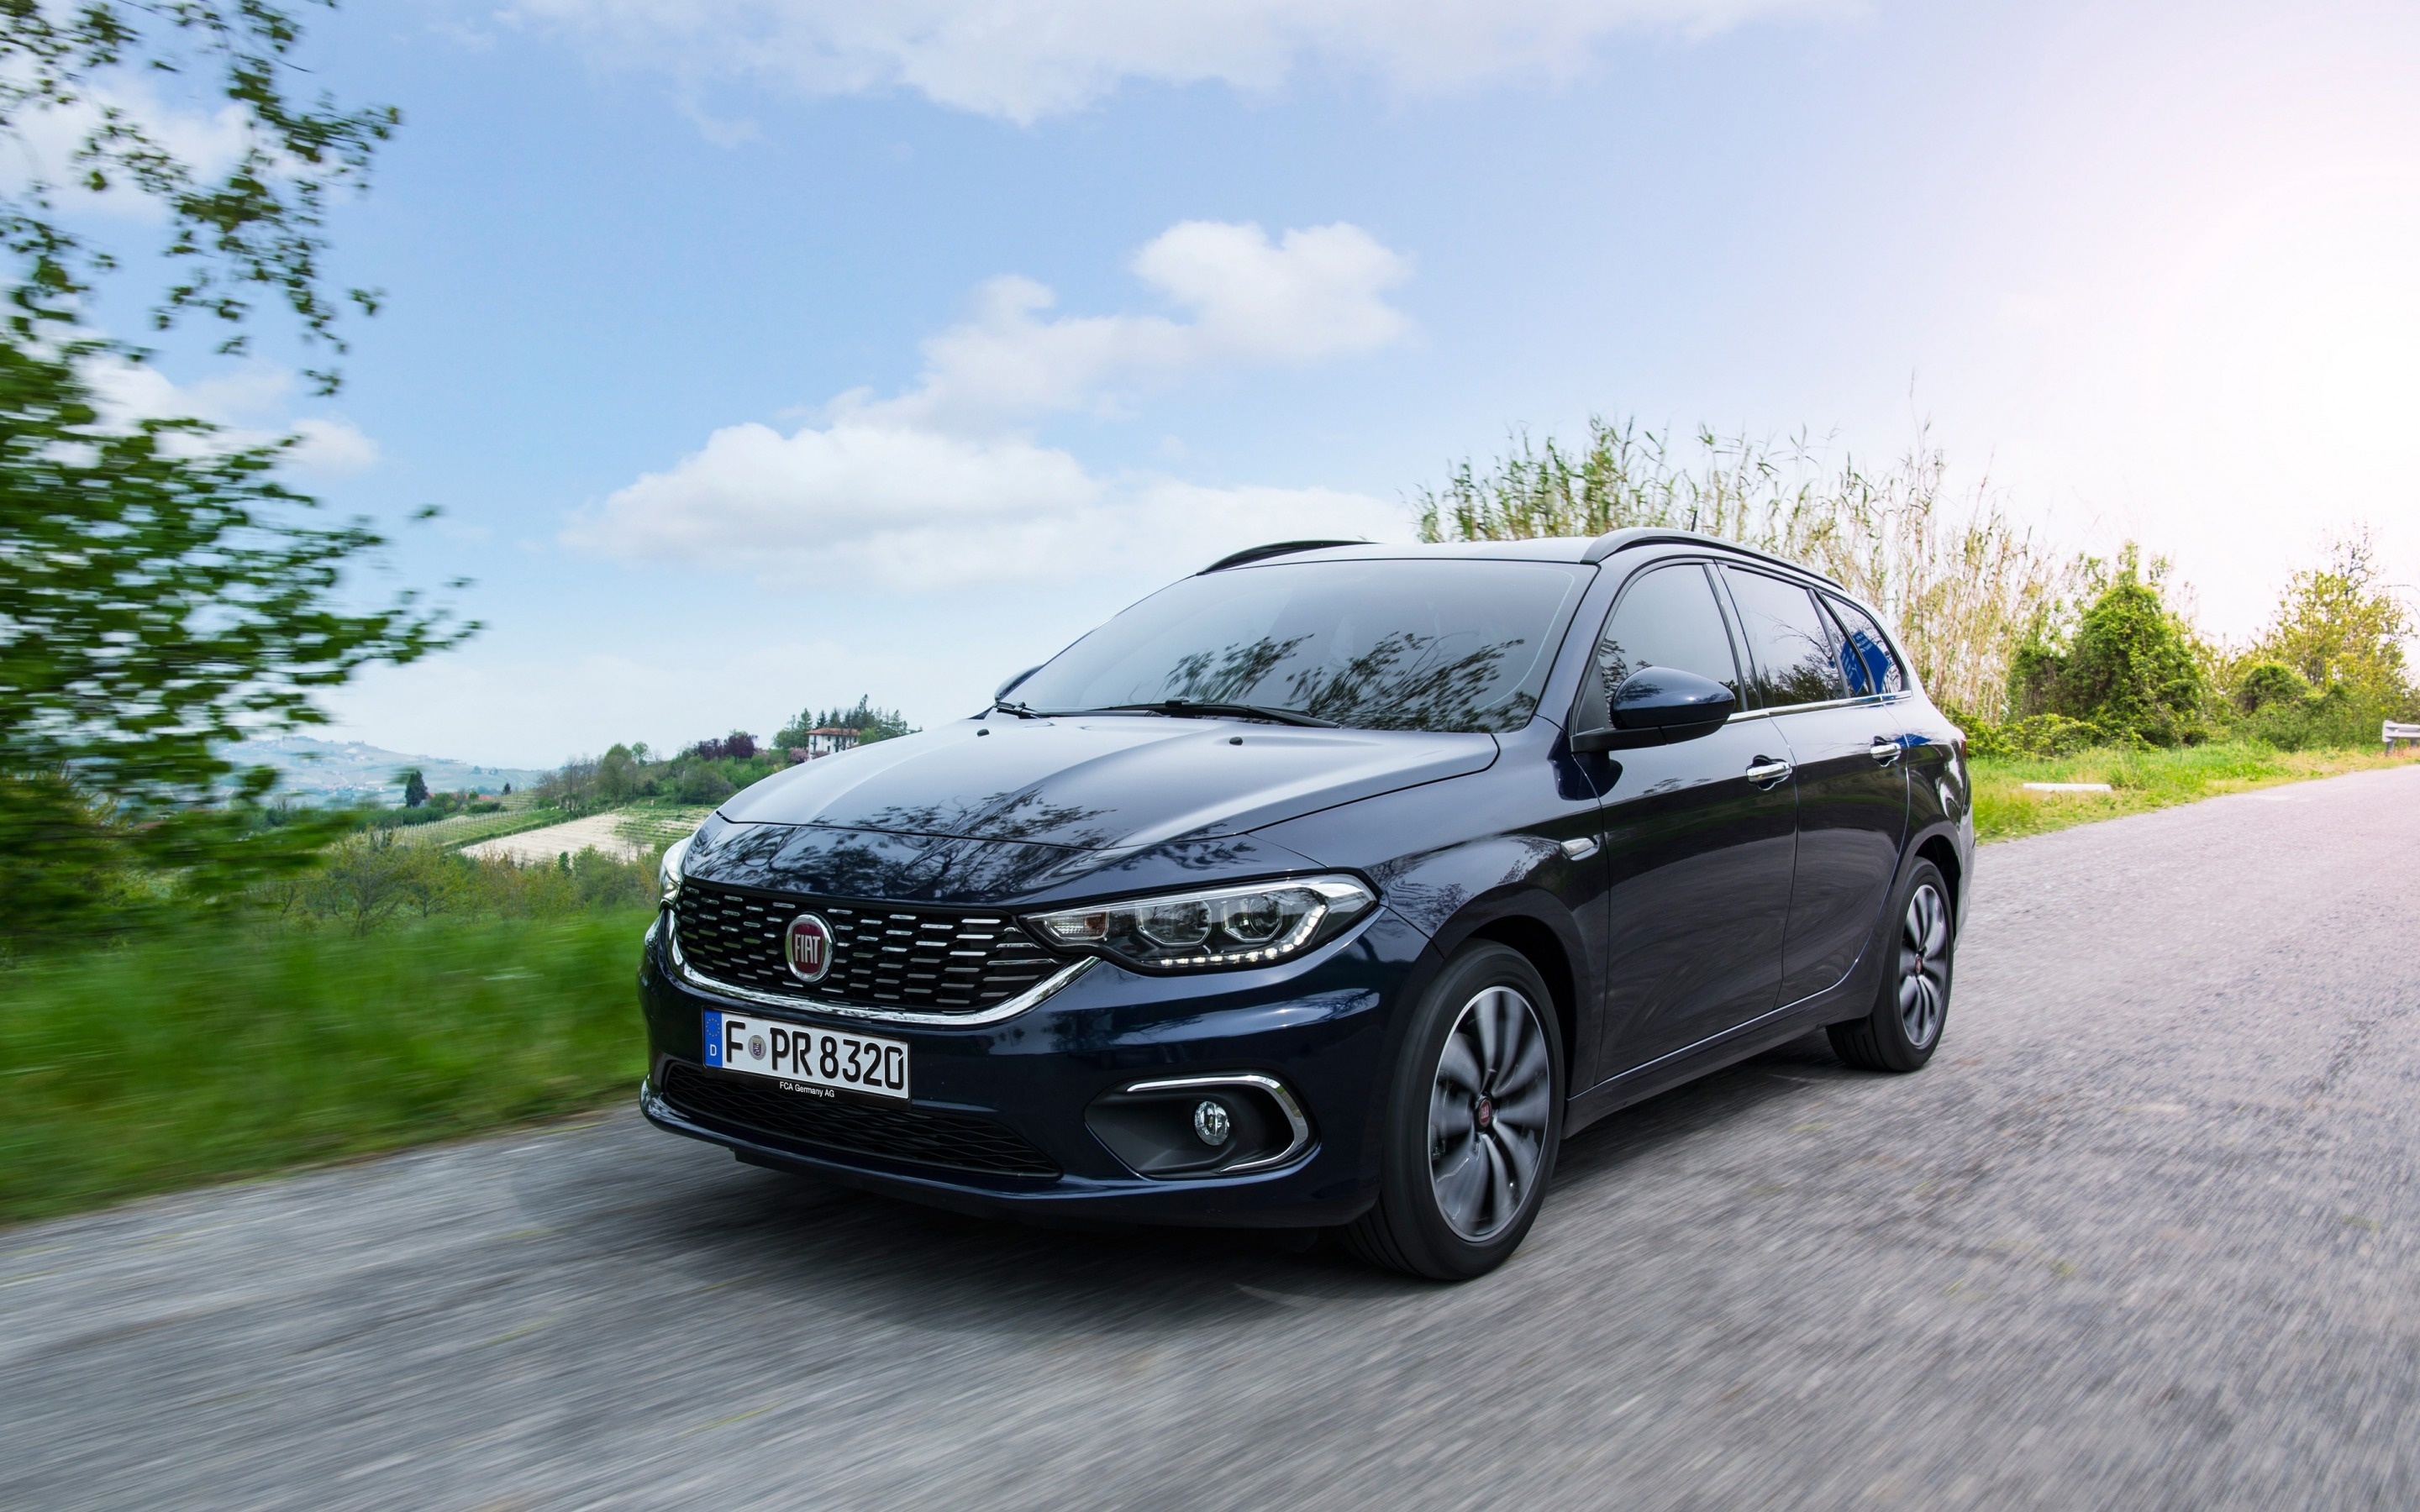 Fiat Tipo Station Wagon, Fiat tipo kombi, Blue wagon road speed, High-quality HD pictures, 2880x1800 HD Desktop